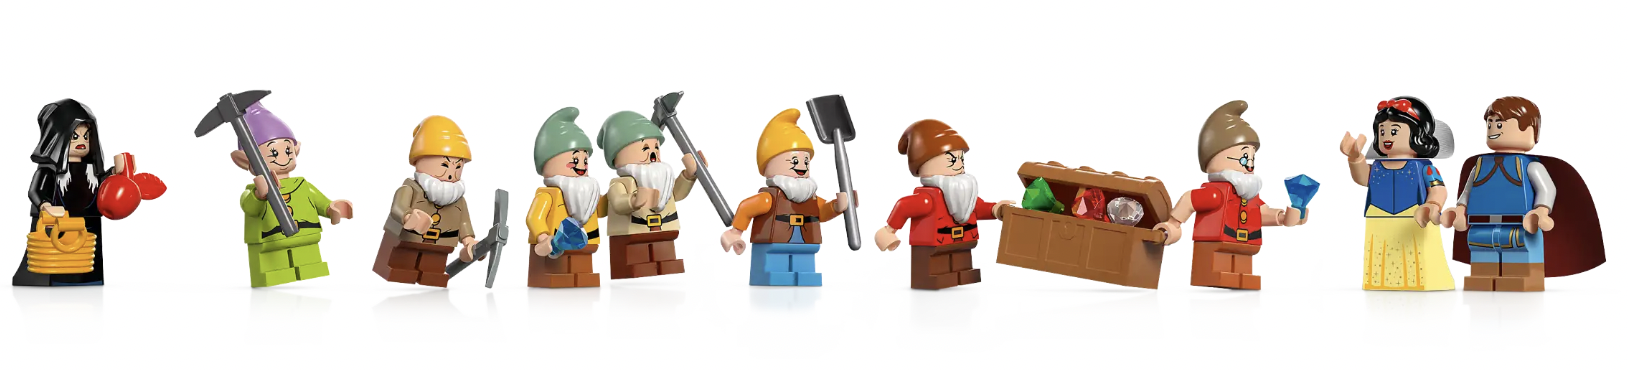 snow white lego set, characters